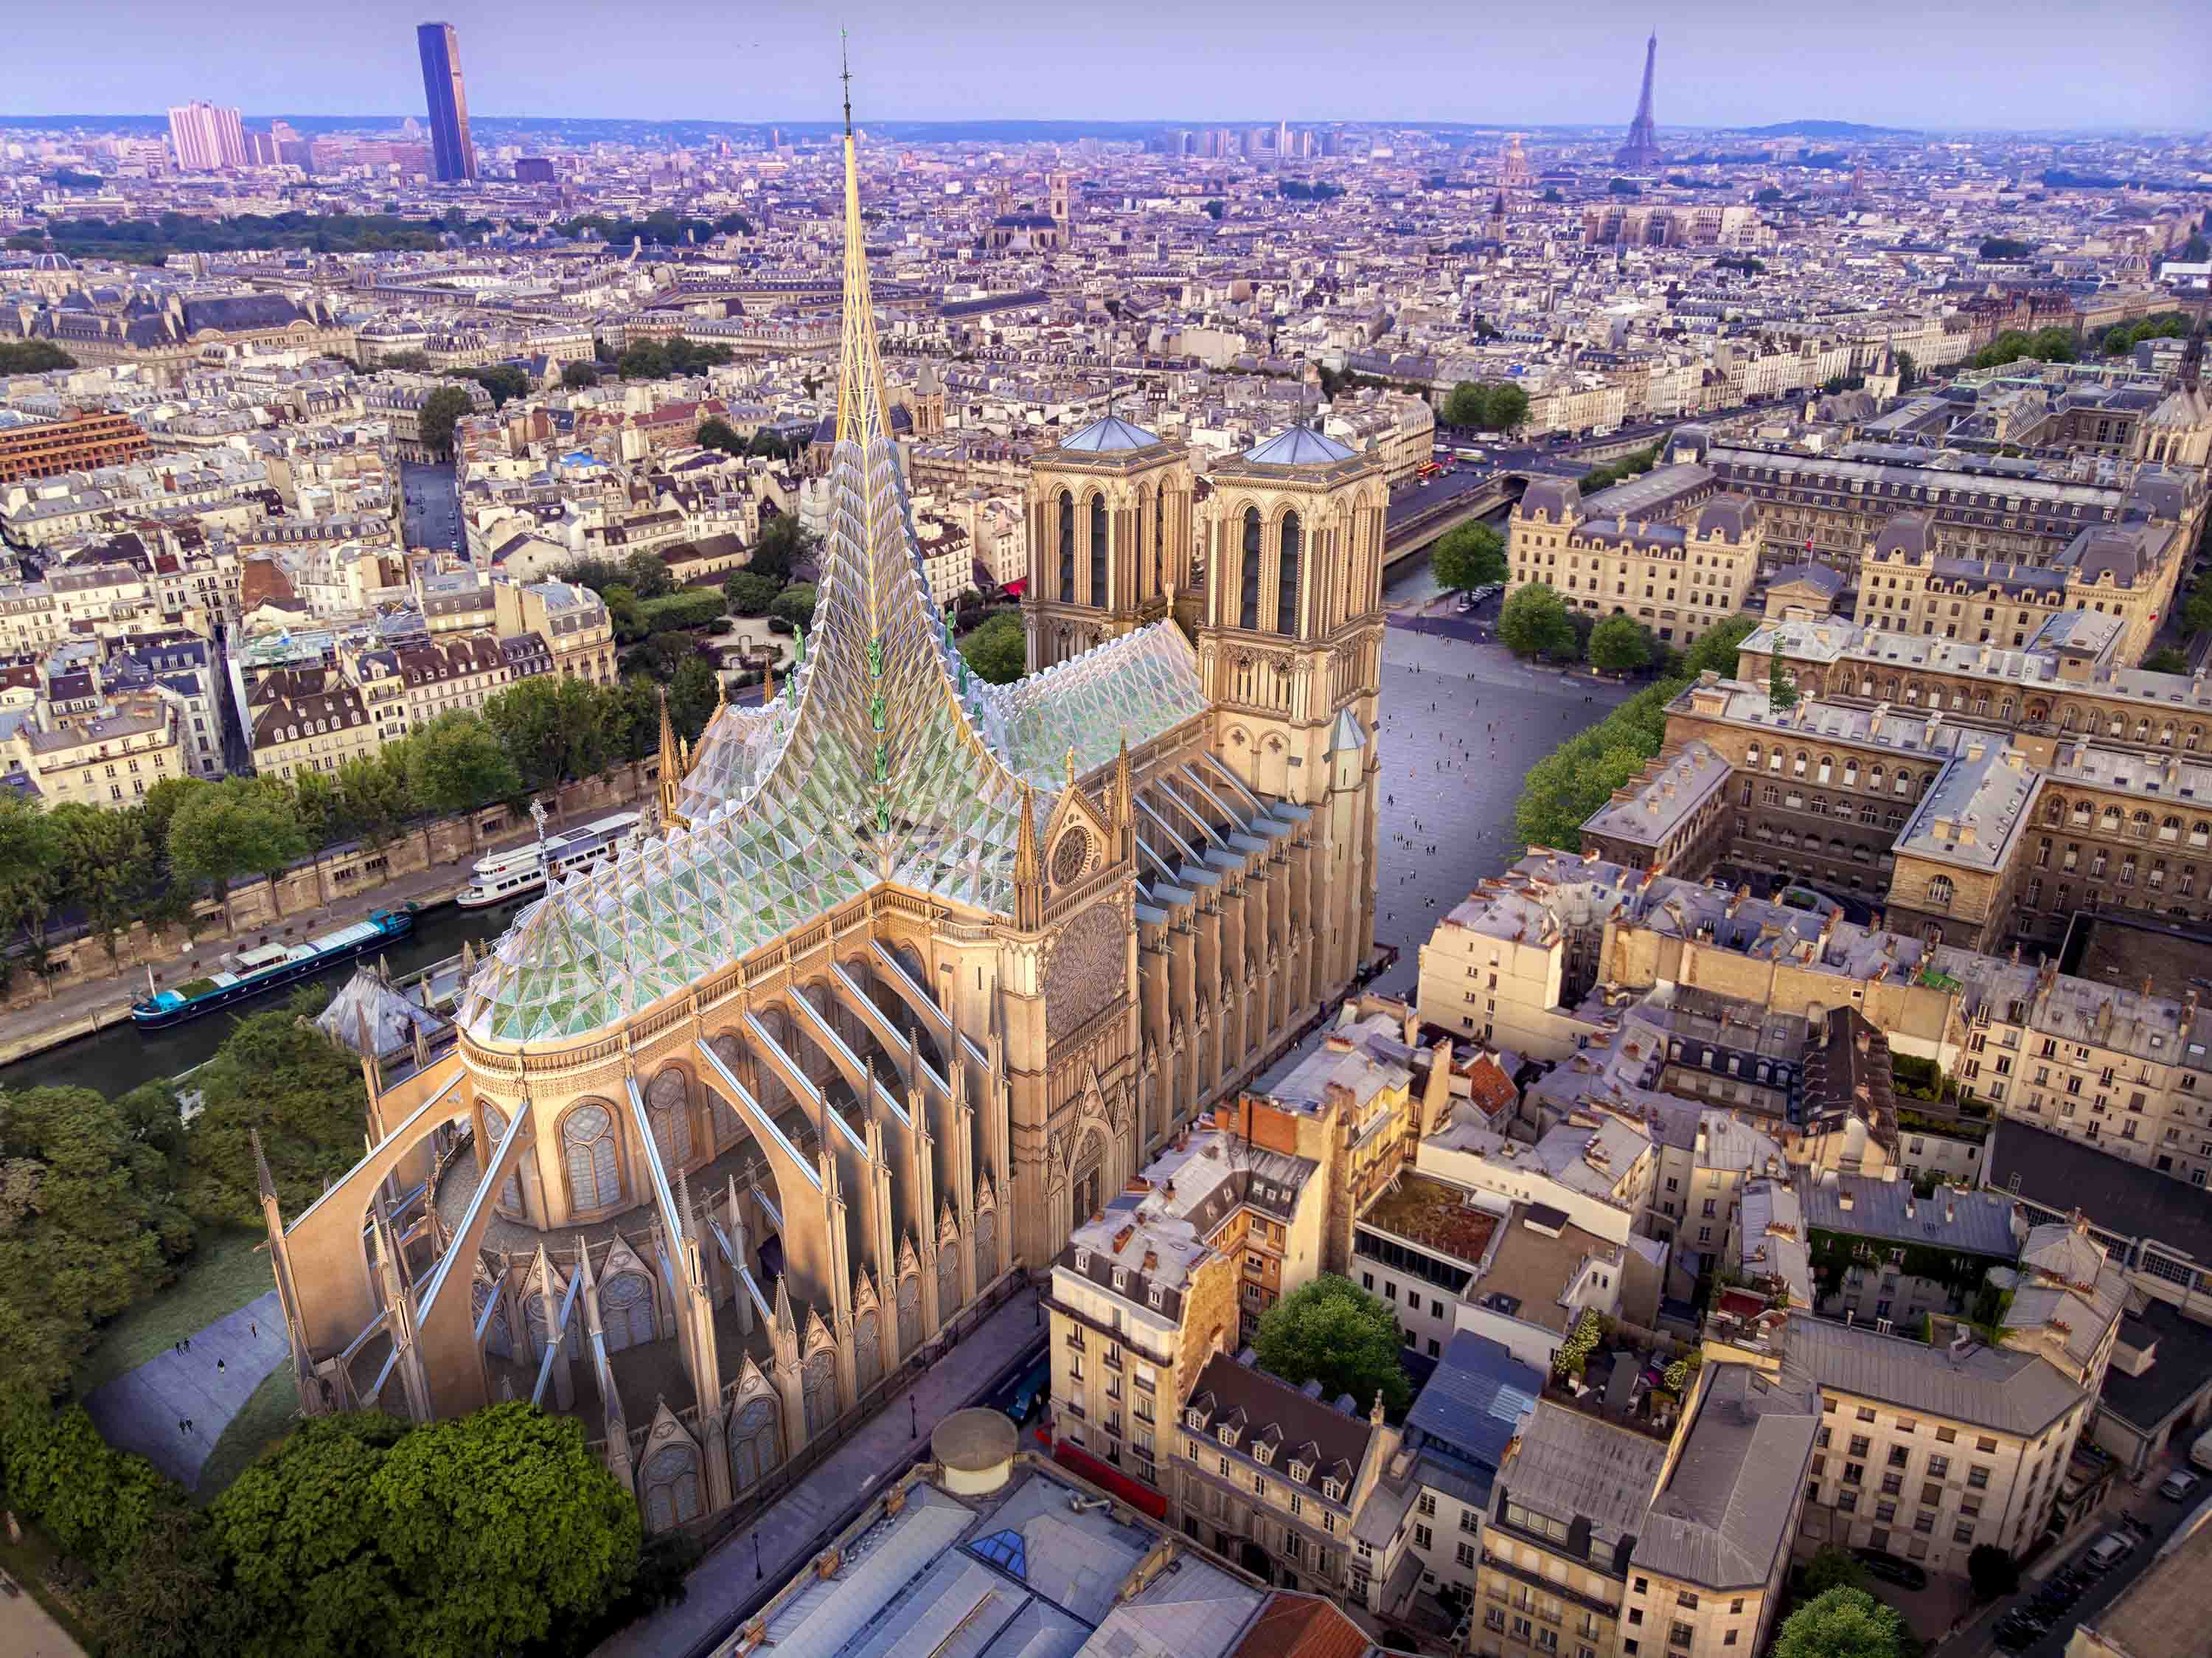 rebuilt Notre Dame cathedral will exactly same - CNN Style